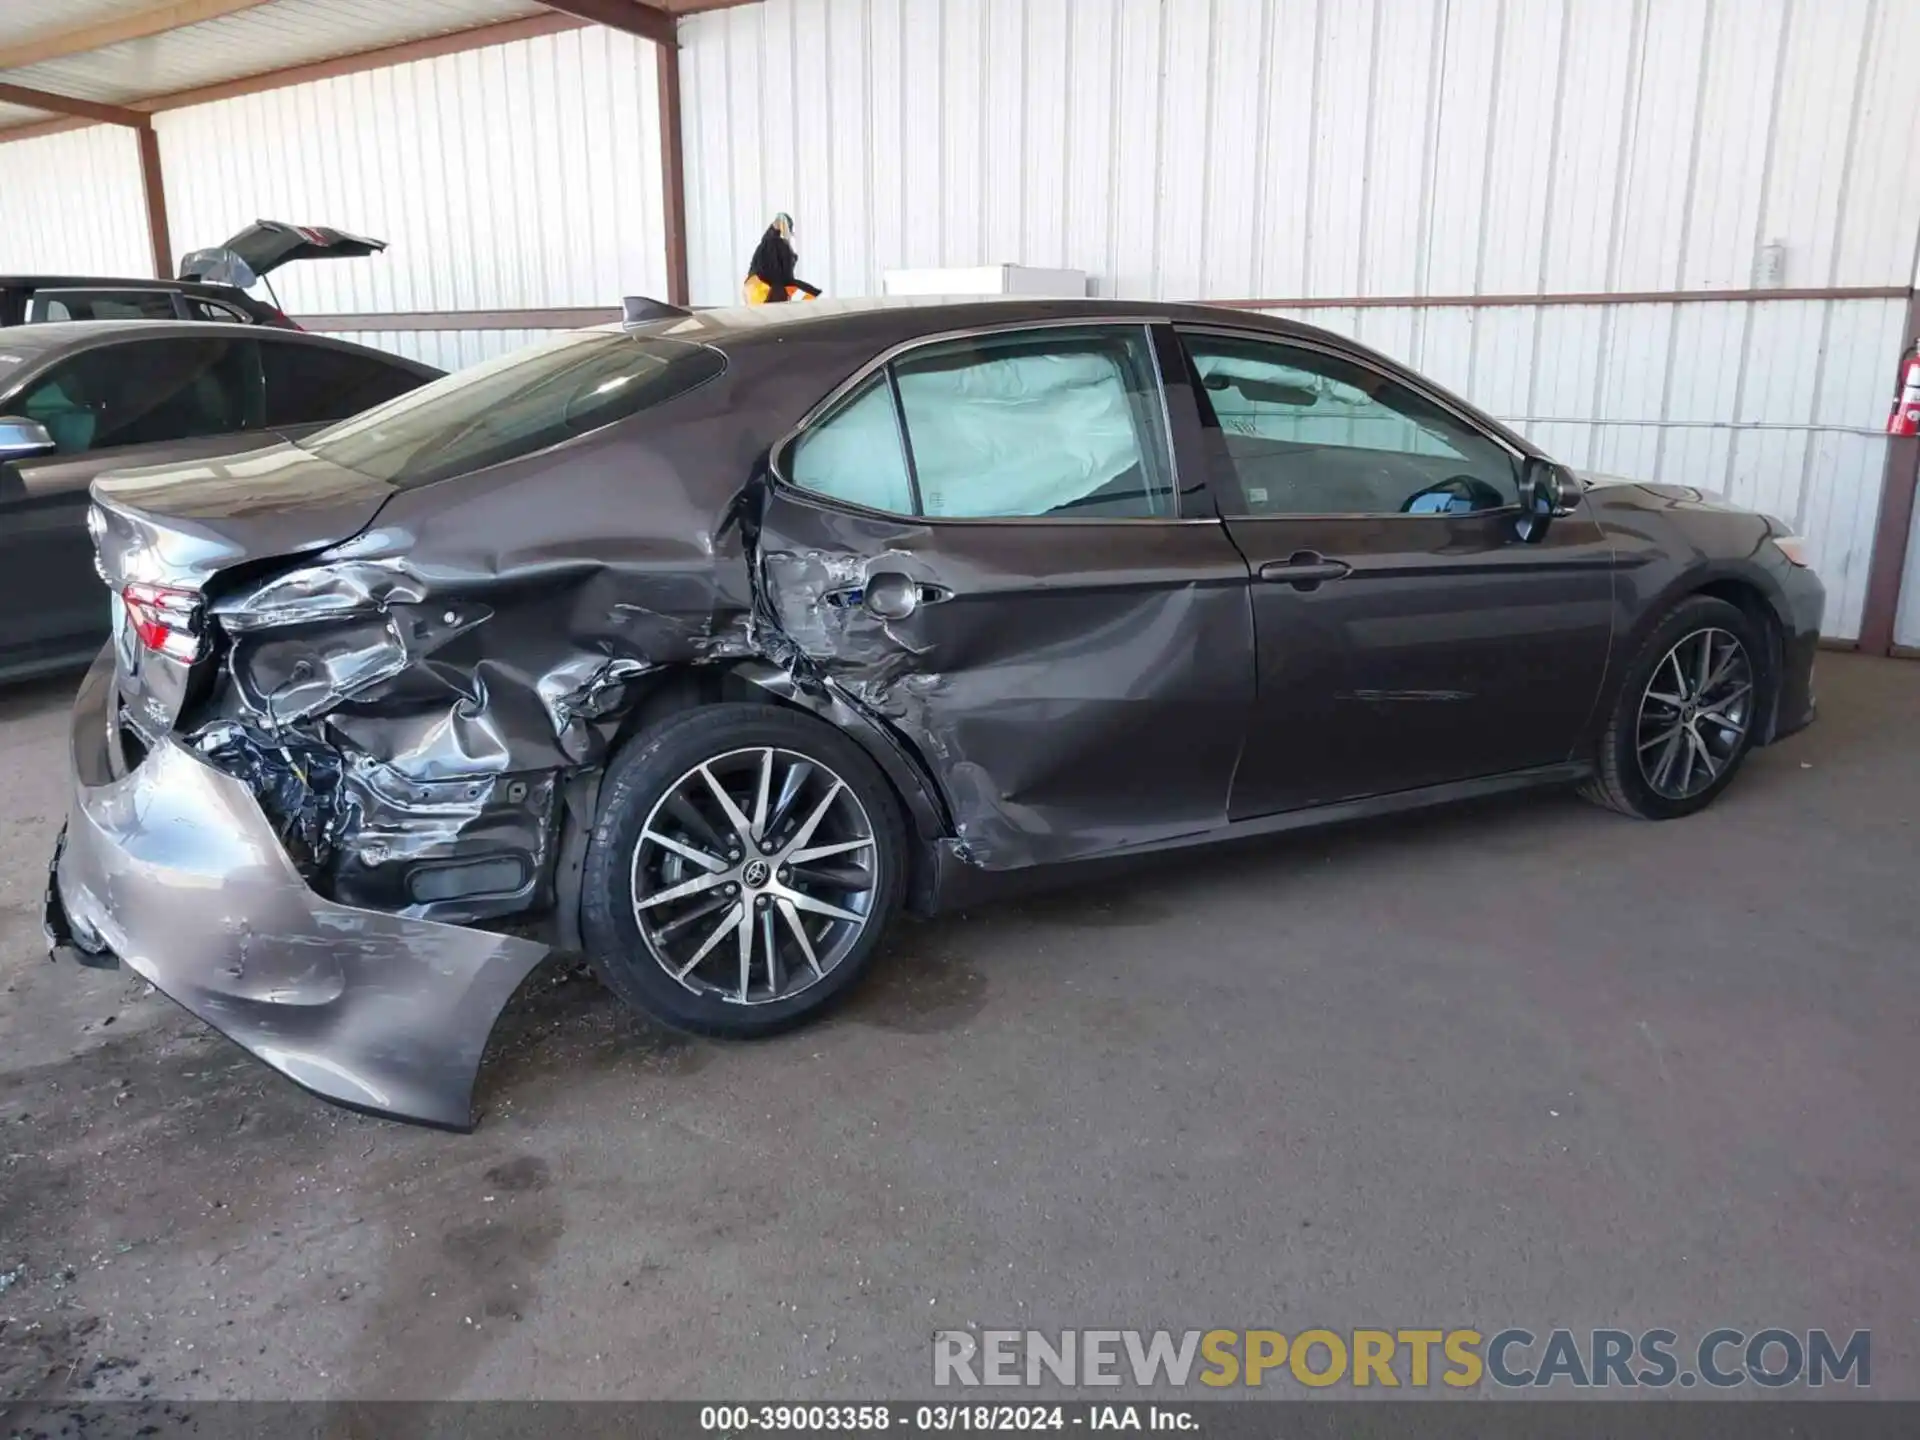 13 Photograph of a damaged car 4T1F31AKXNU587441 TOYOTA CAMRY 2022